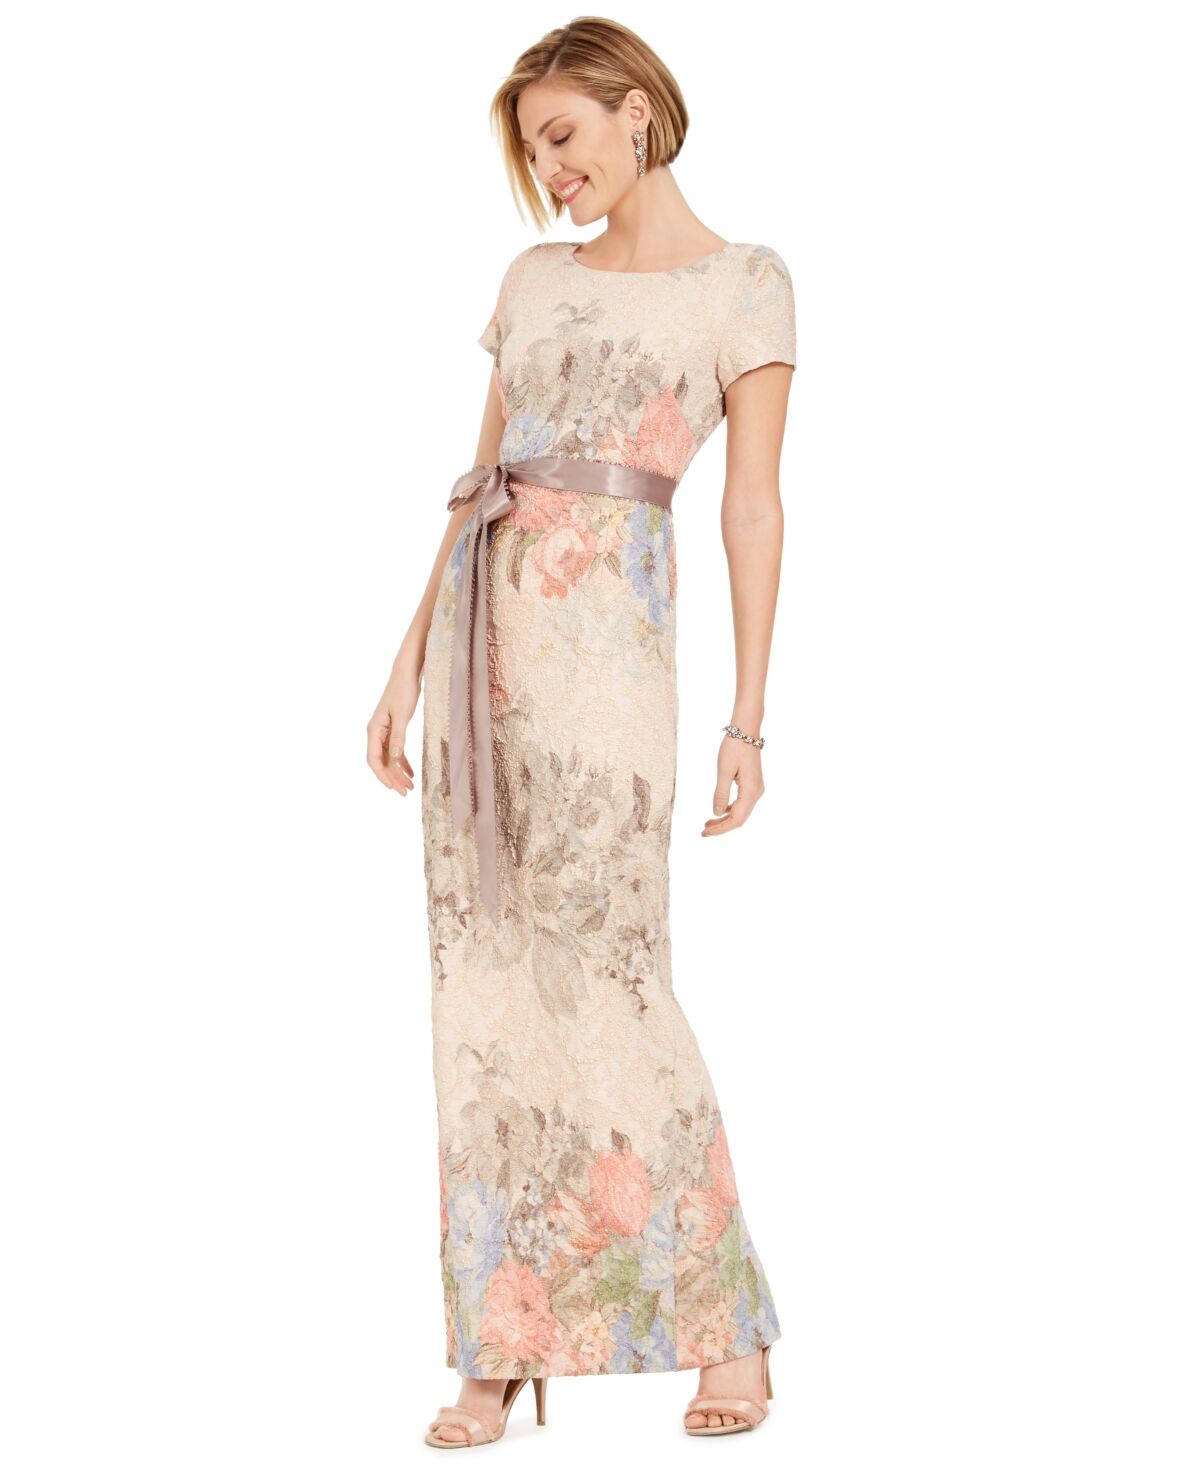 Adrianna Papell Women's Floral-Print Short Sleeve Column Gown - Blush Floral